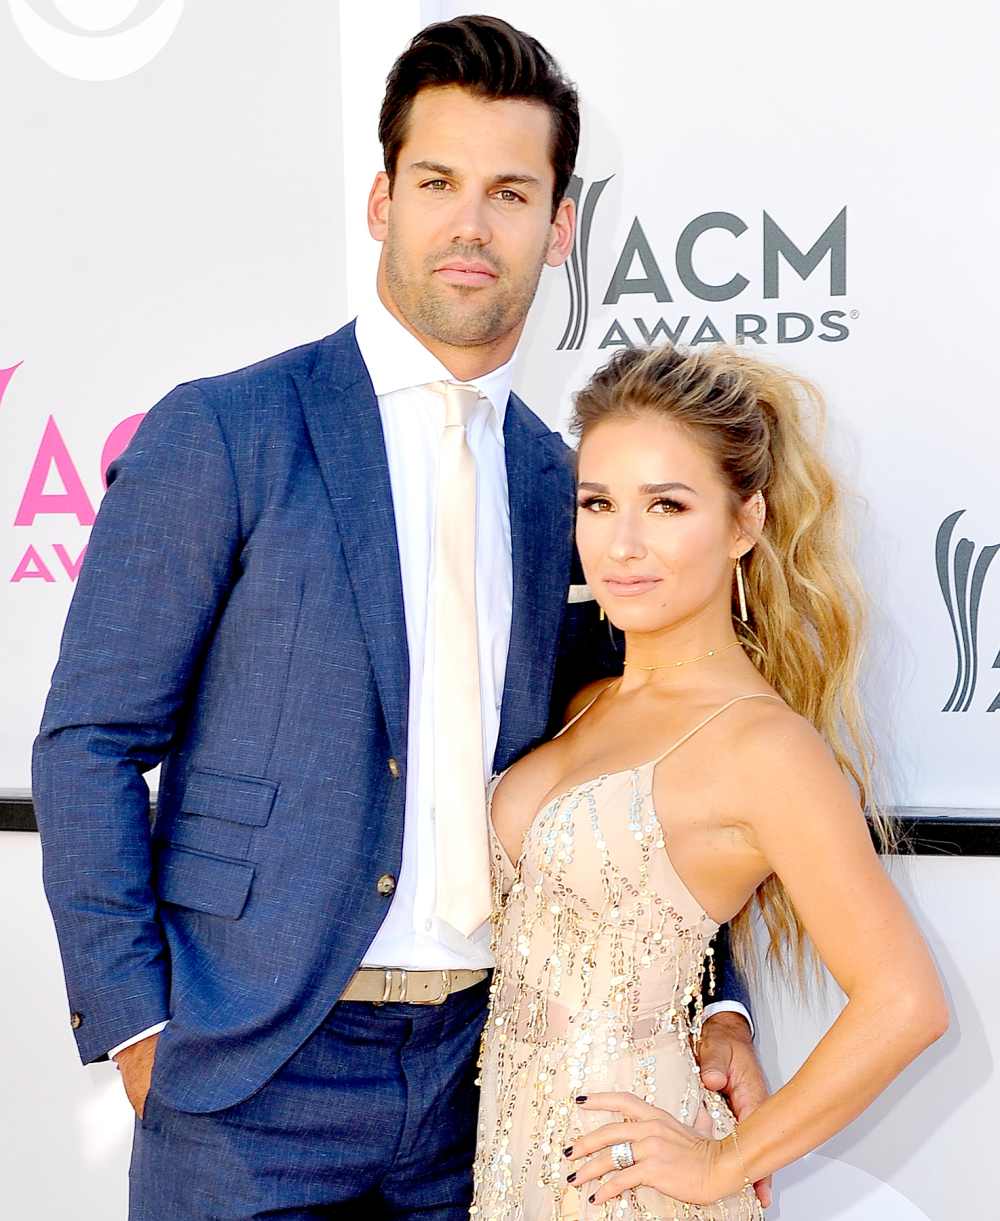 NFL Player Eric Decker and Jessie James Decker arrive at the 52nd Academy Of Country Music Awards on April 2, 2017 in Las Vegas, Nevada.